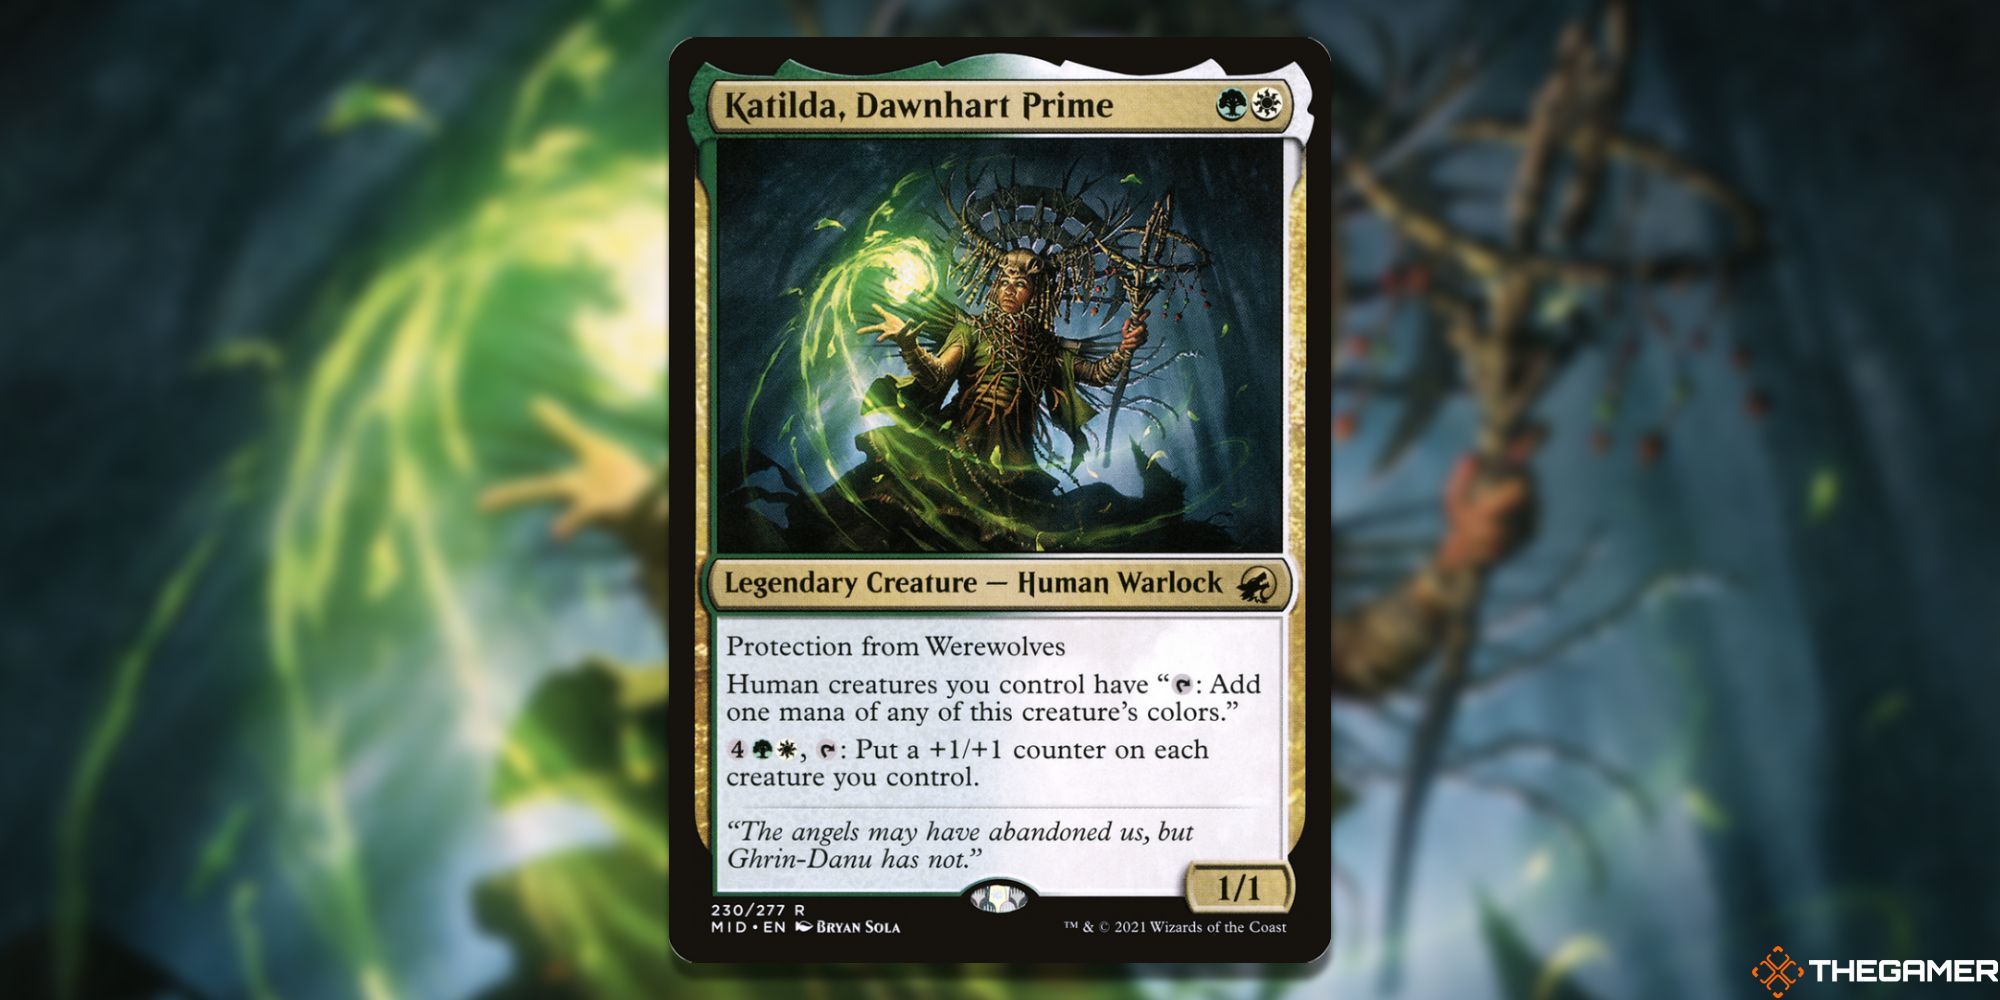 Image of the Katilda, Dawnhart Prime card in Magic: The Gathering, with art by Bryan Sola